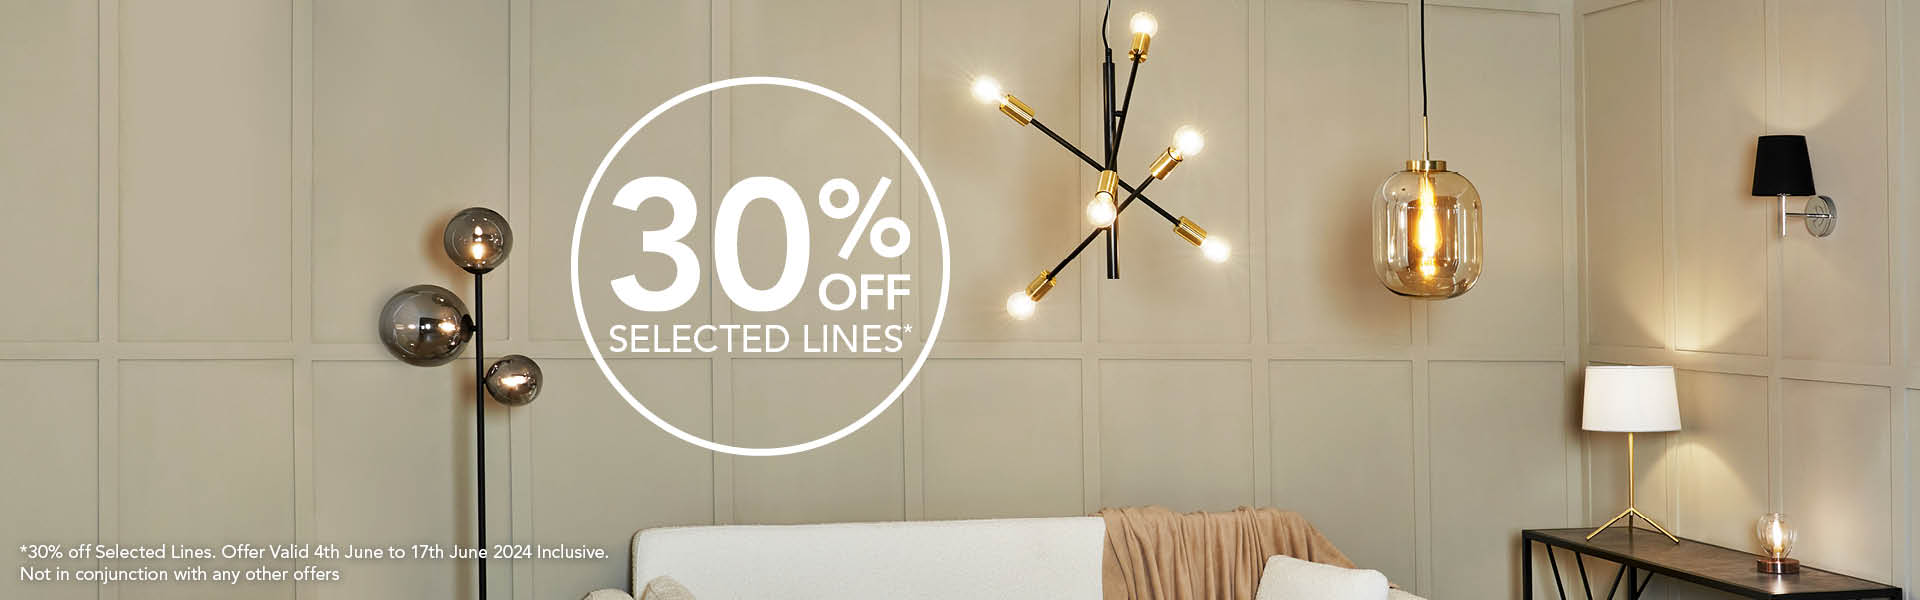 *30% off Selected Lines. Valid 4th June to 17th June 2024. Excludes exitisting offers